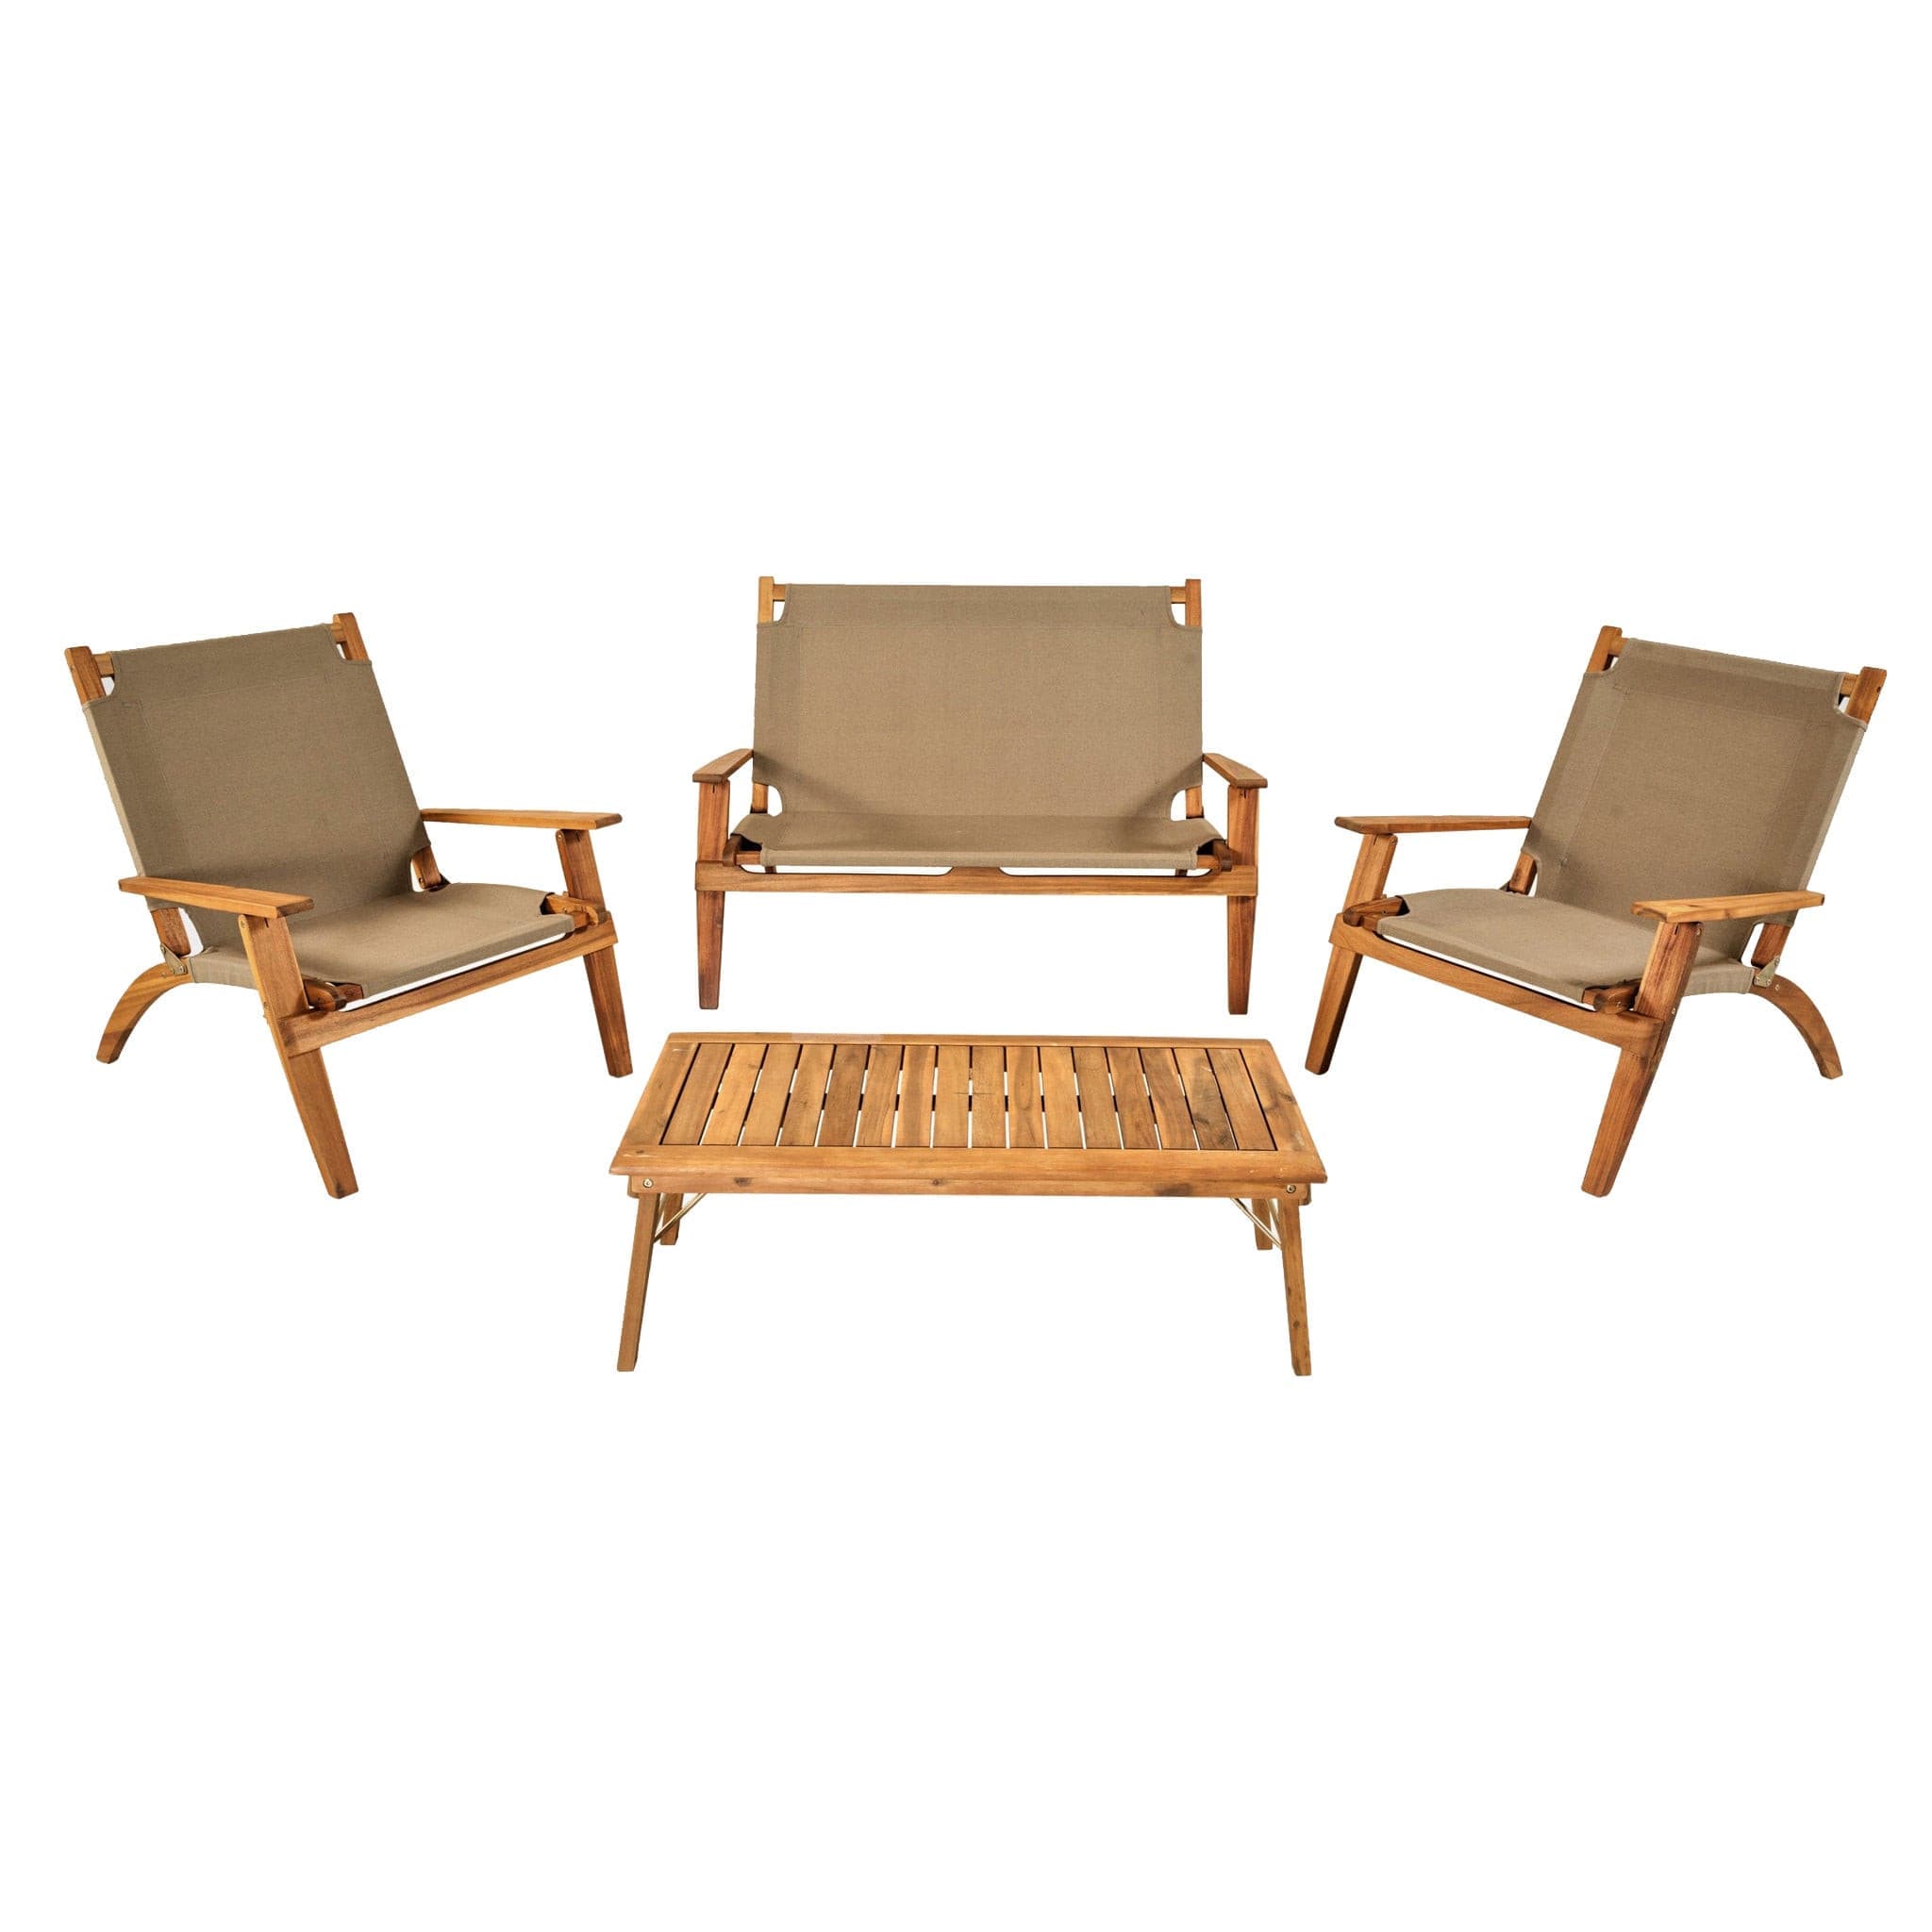 AZALEA - set of acacia bench, two armchairs with table